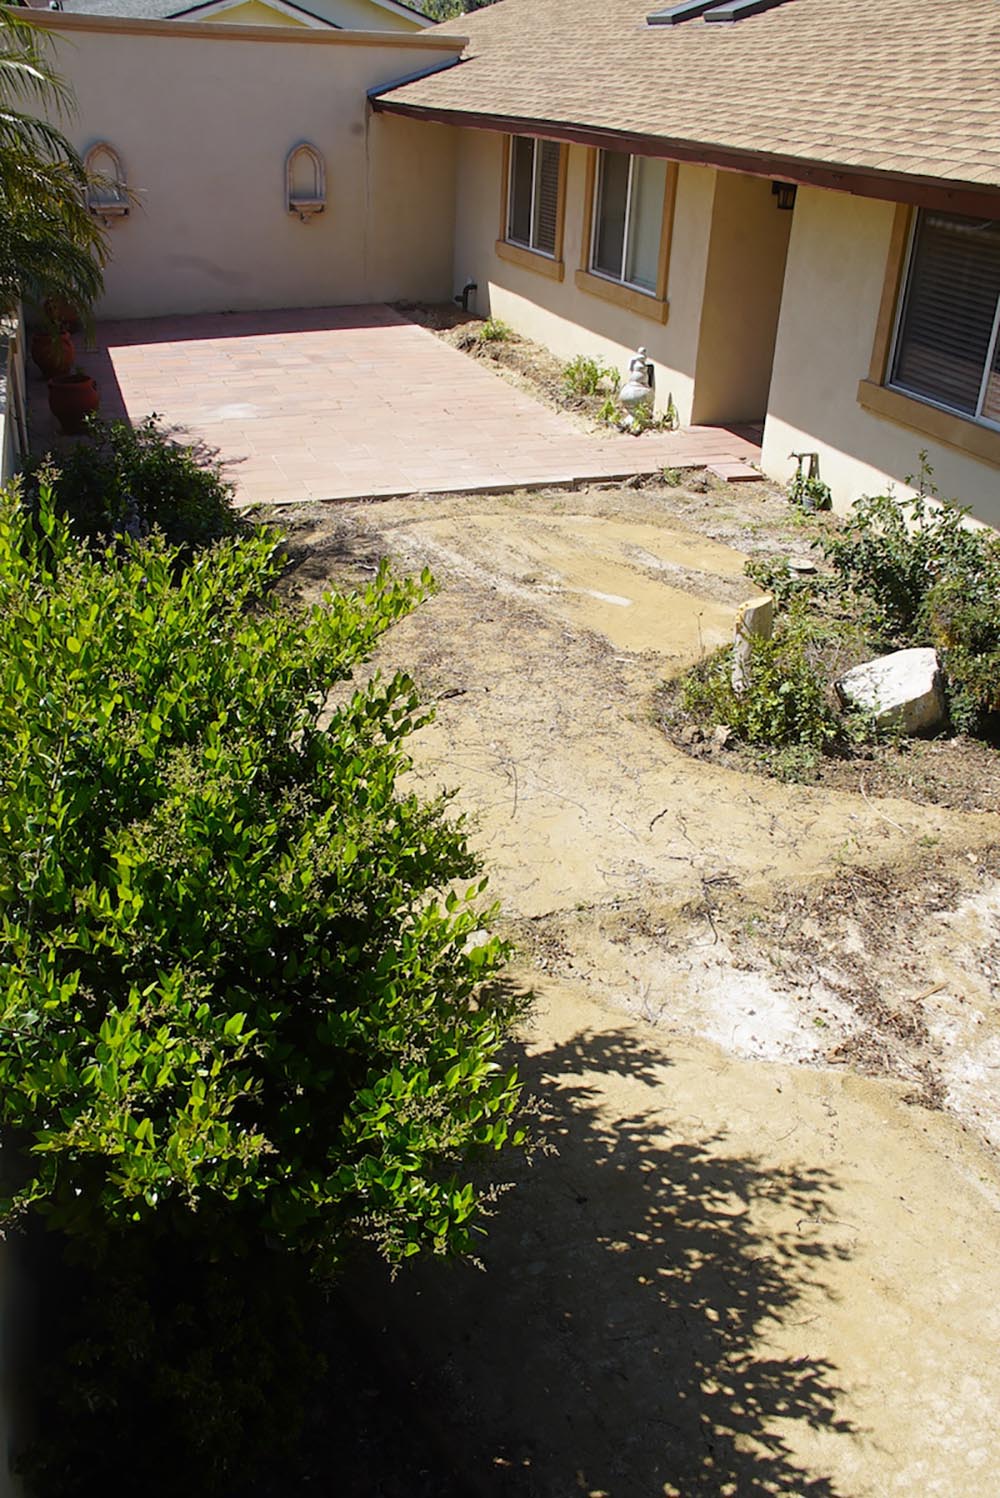 An empty courtyard with a patio and dirt that has not been landscaped.